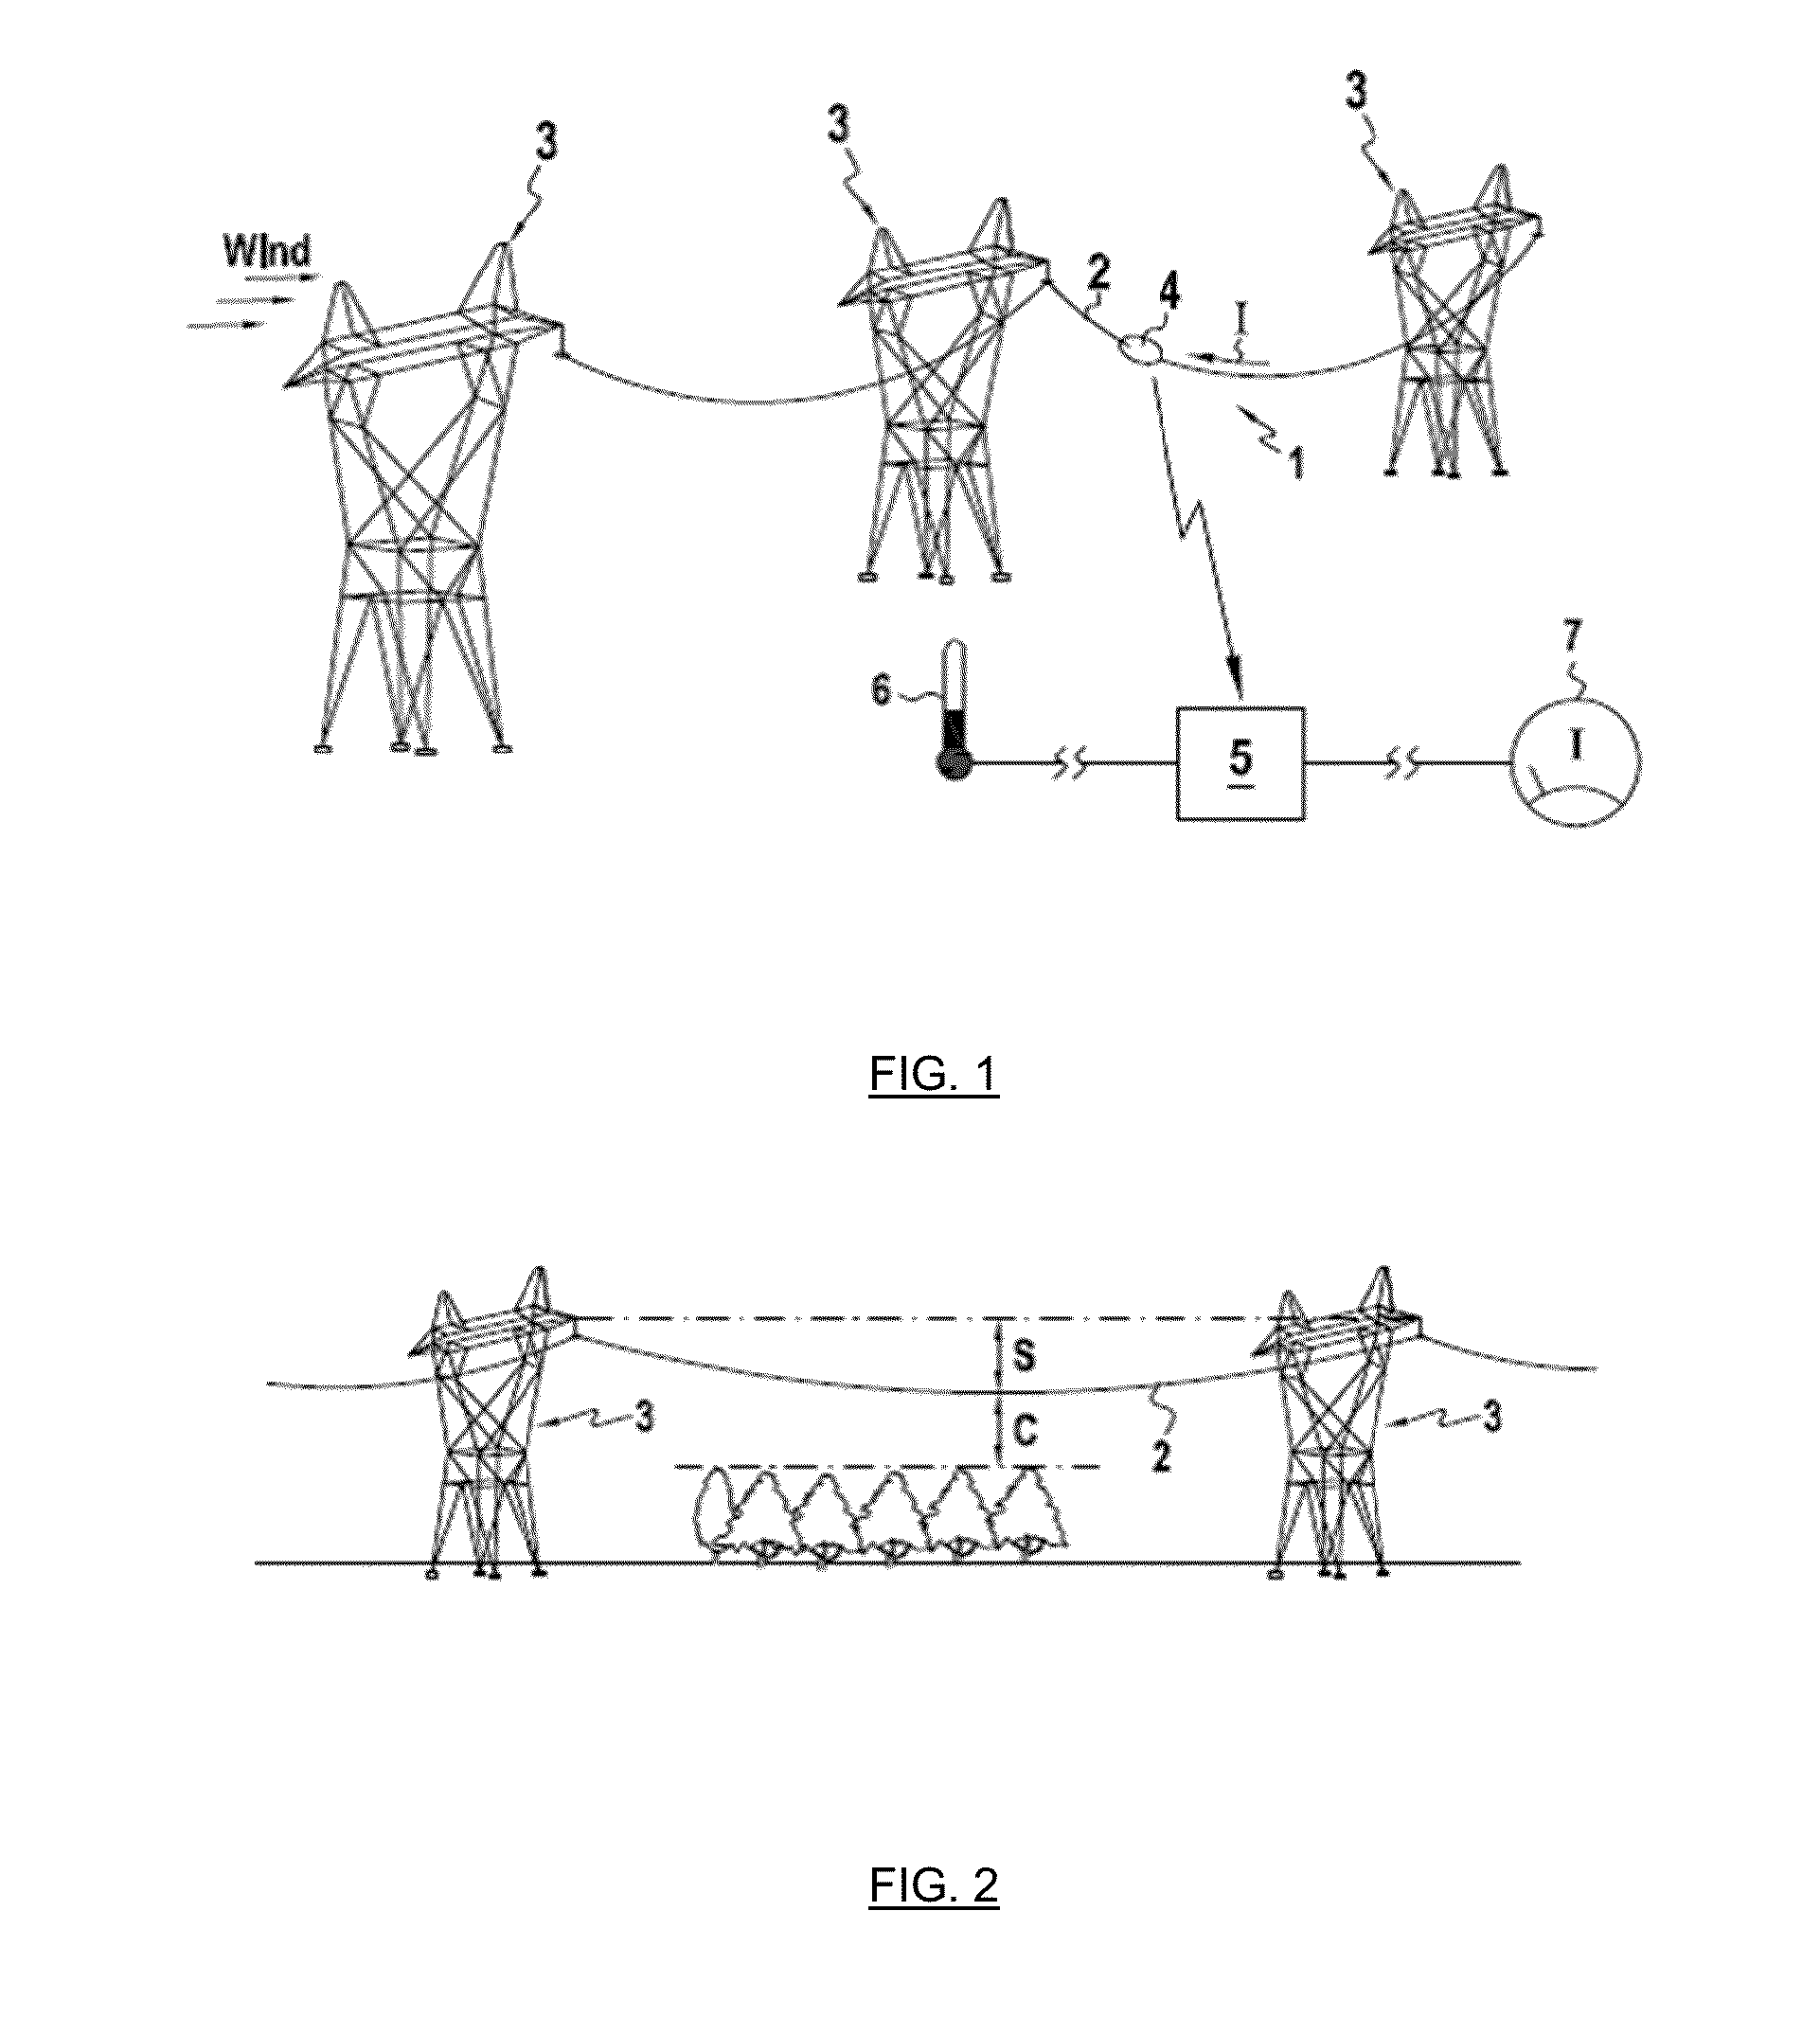 Method and System for Determining the Thermal Power Line Rating